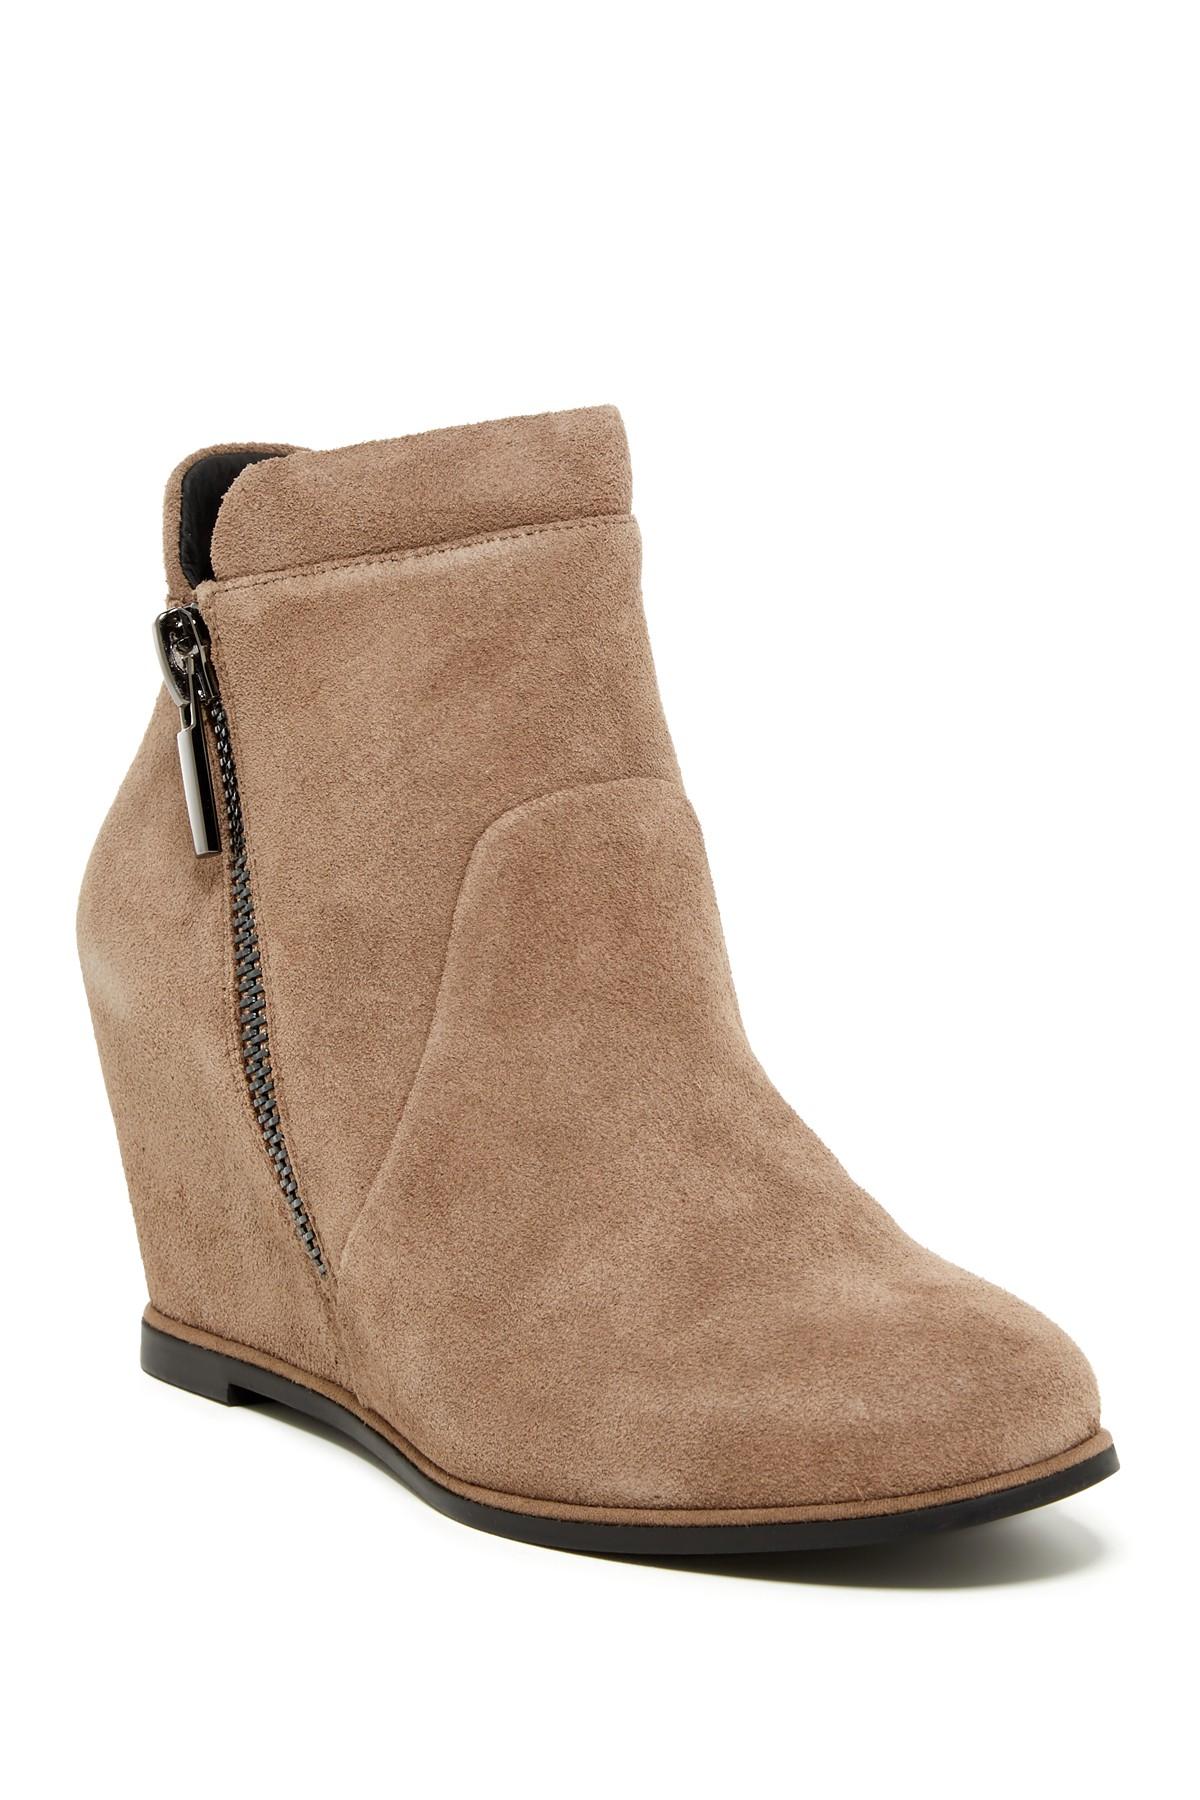 Lyst - Kenneth cole Vivian Wedge Boot in Brown